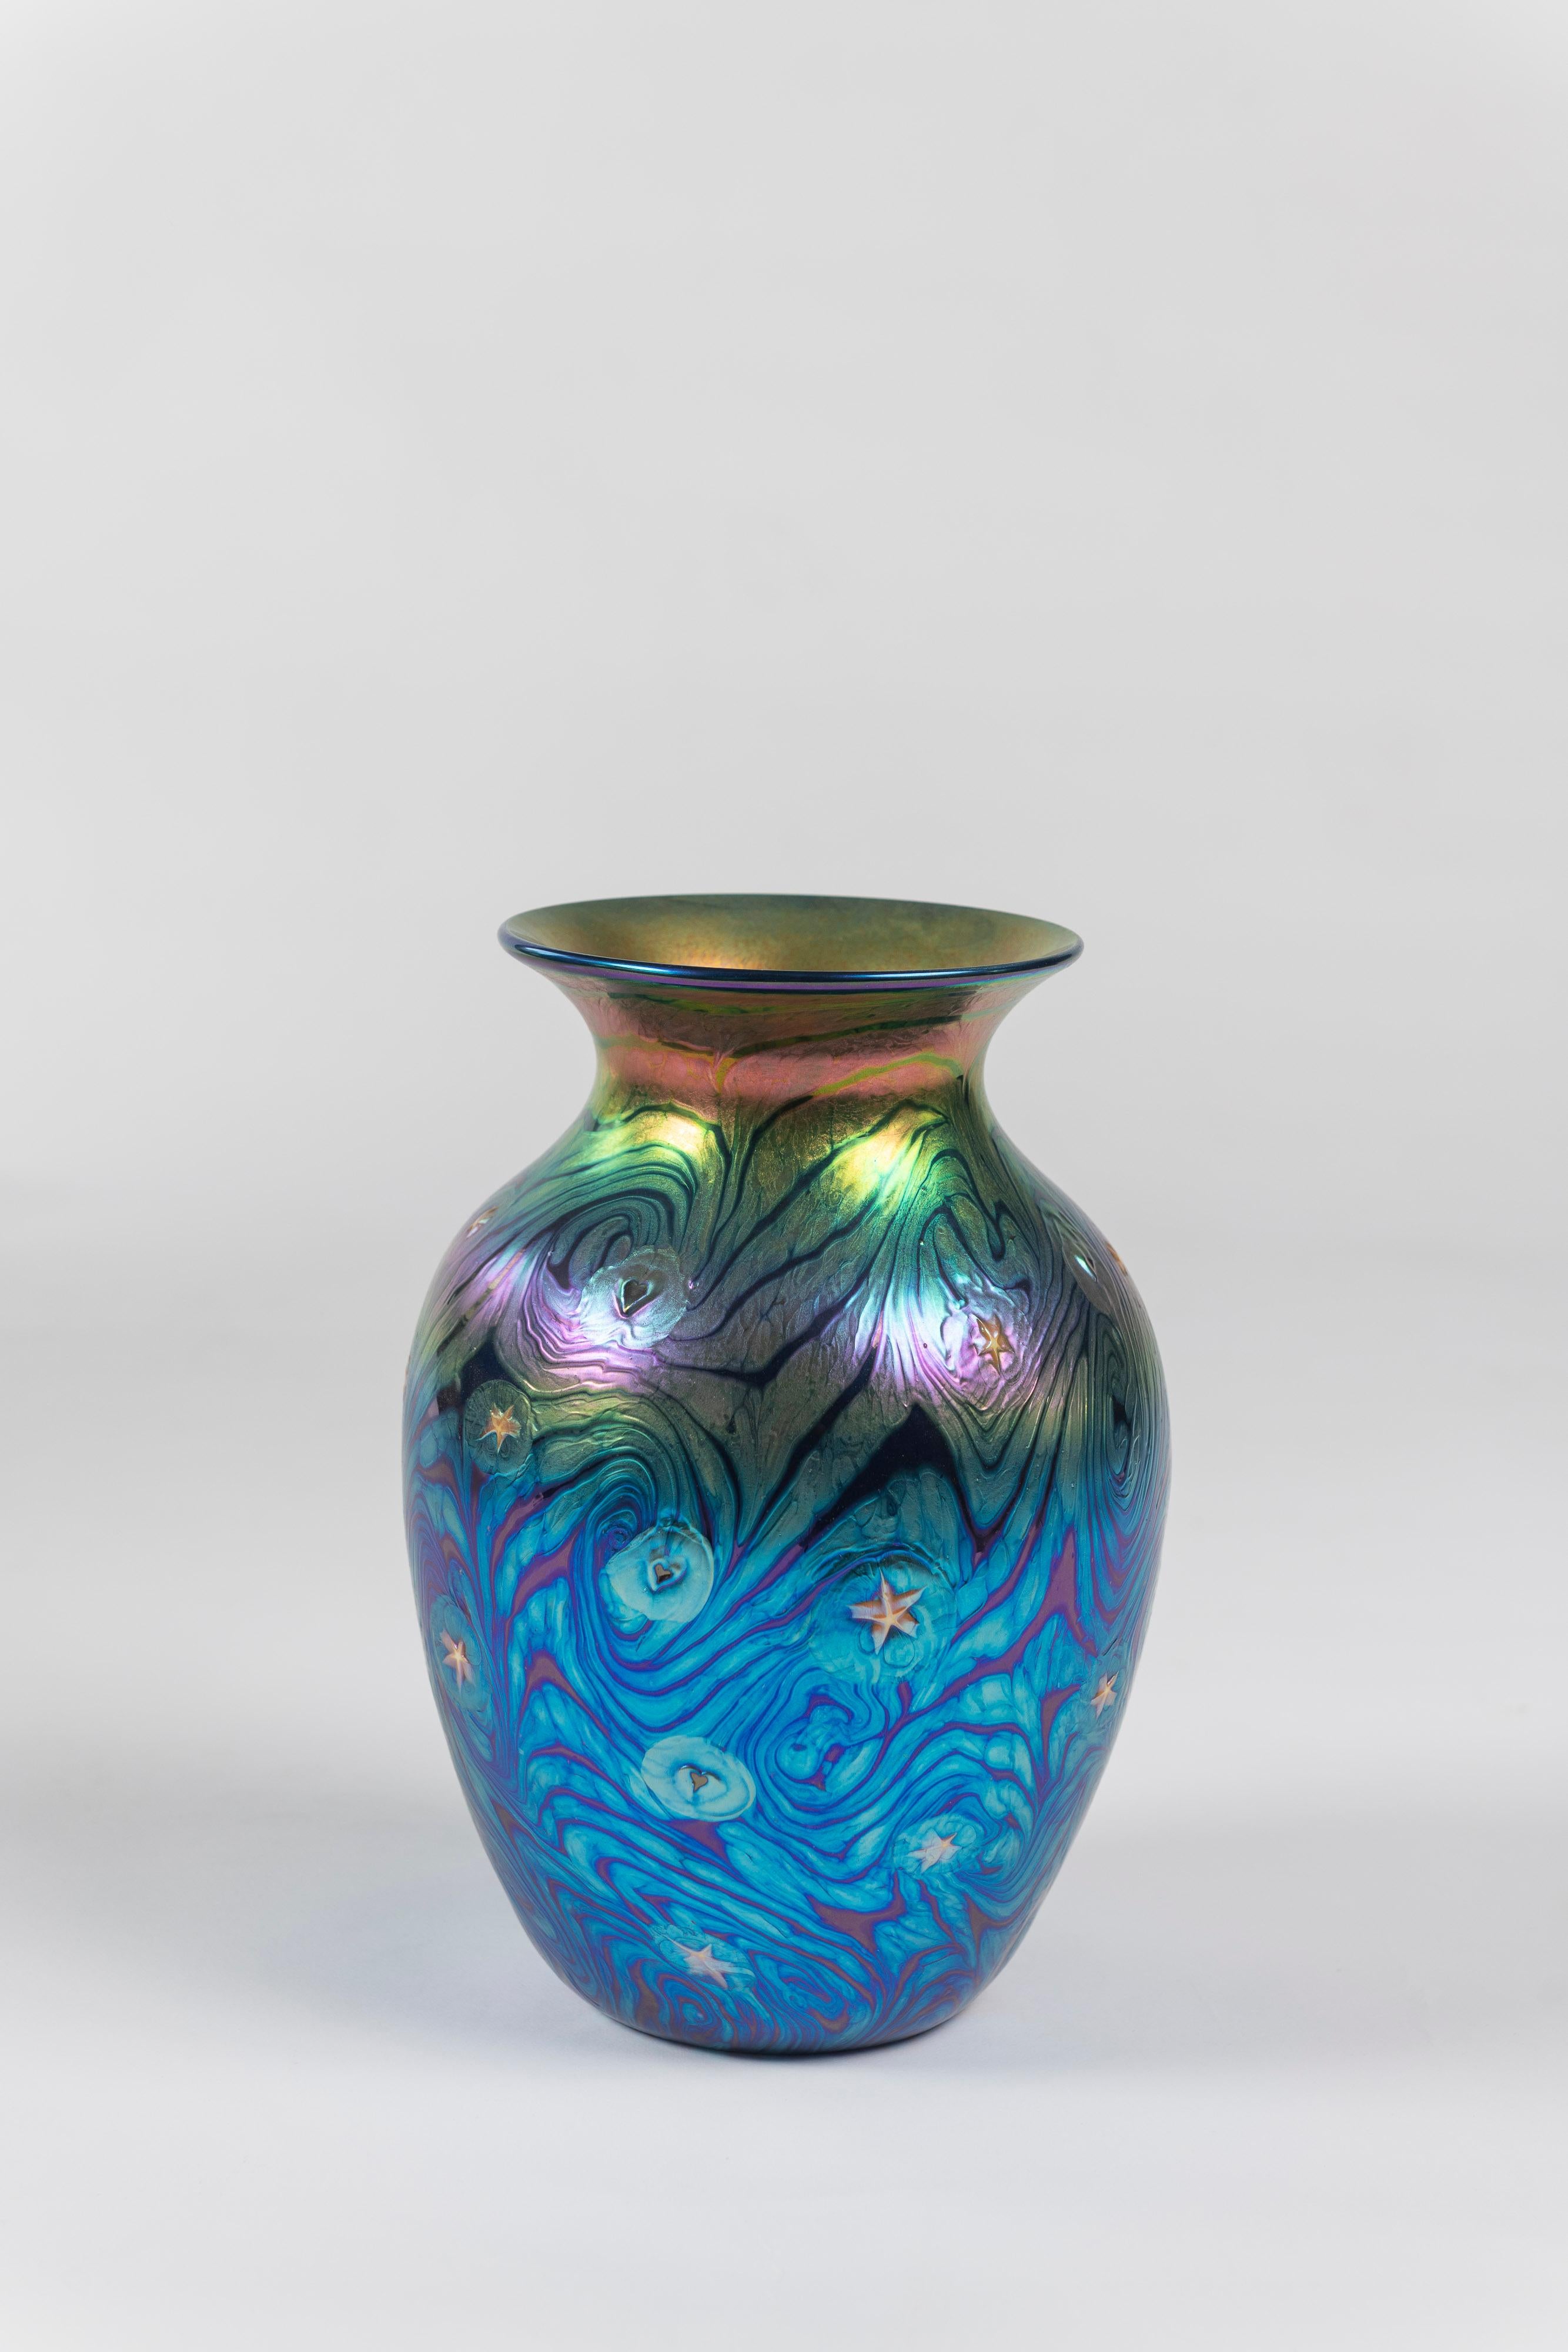 Contemporary art glass vase with “Starry Night” design is made by Lunderg Studios based in Davenport, California. Beautiful colors and great piece to add to a growing collection.